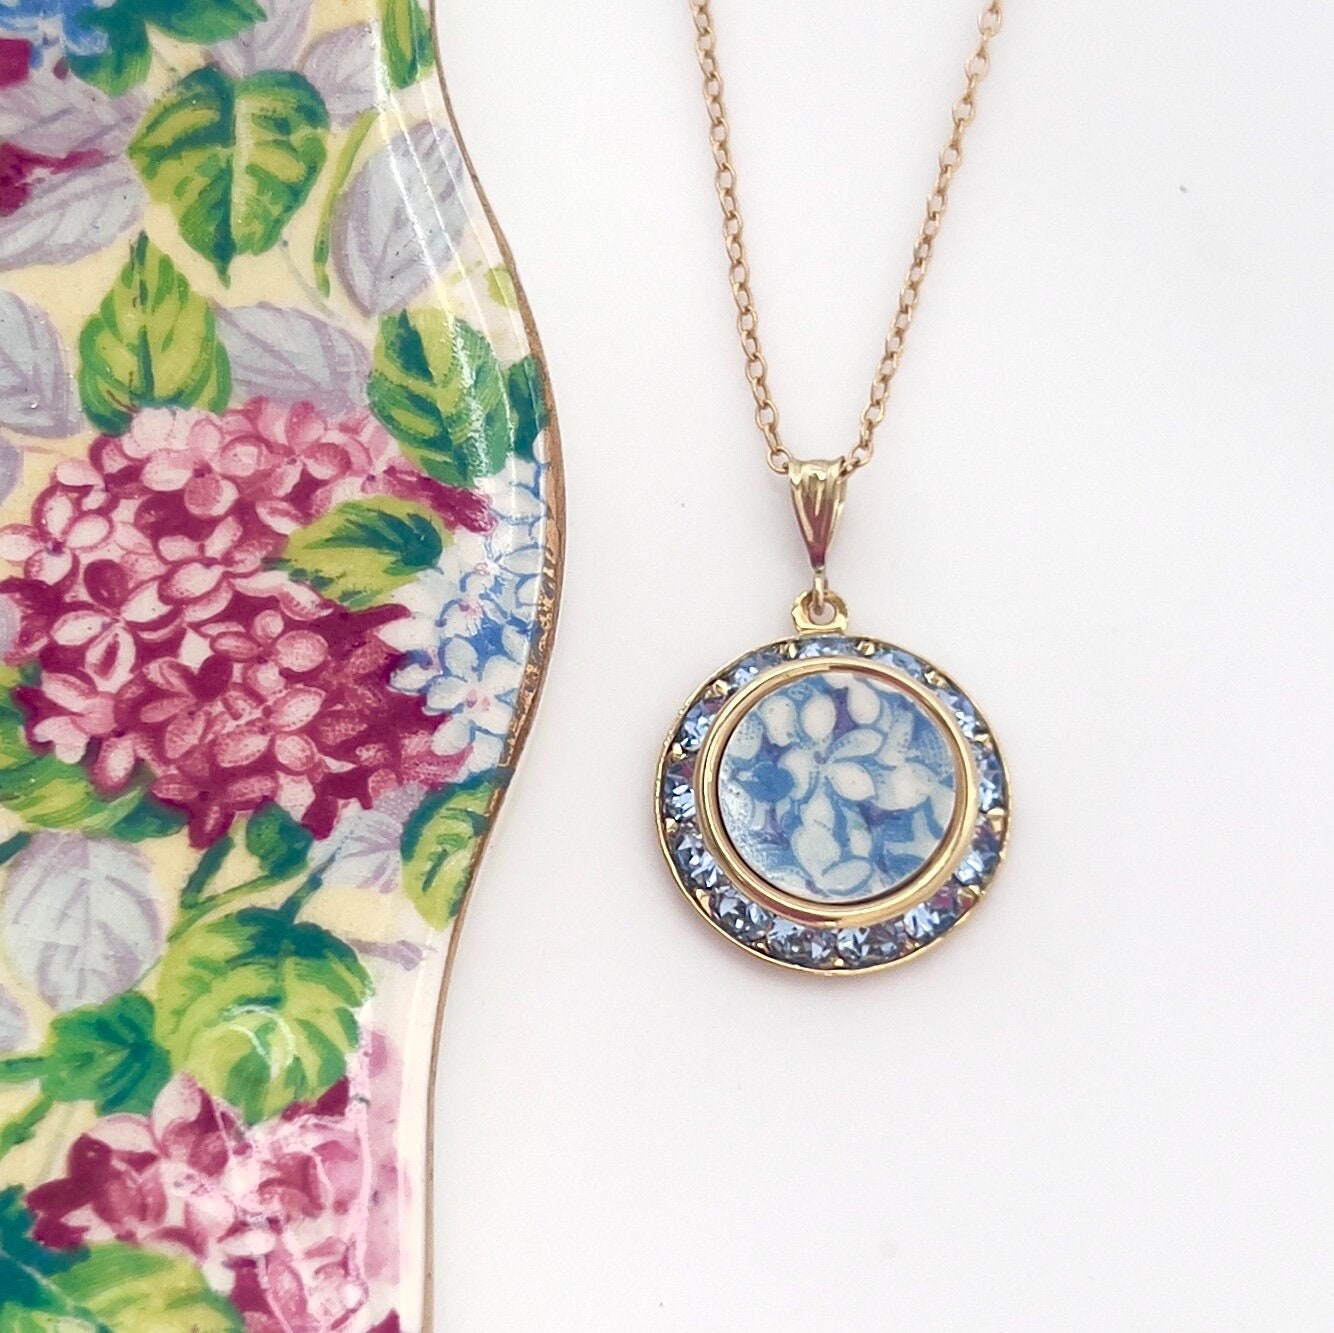 Blue Hydrangea Necklace, Adjustable Gold Crystal Necklace, Vintage Chintz China, Cape Cod Jewelry Gift